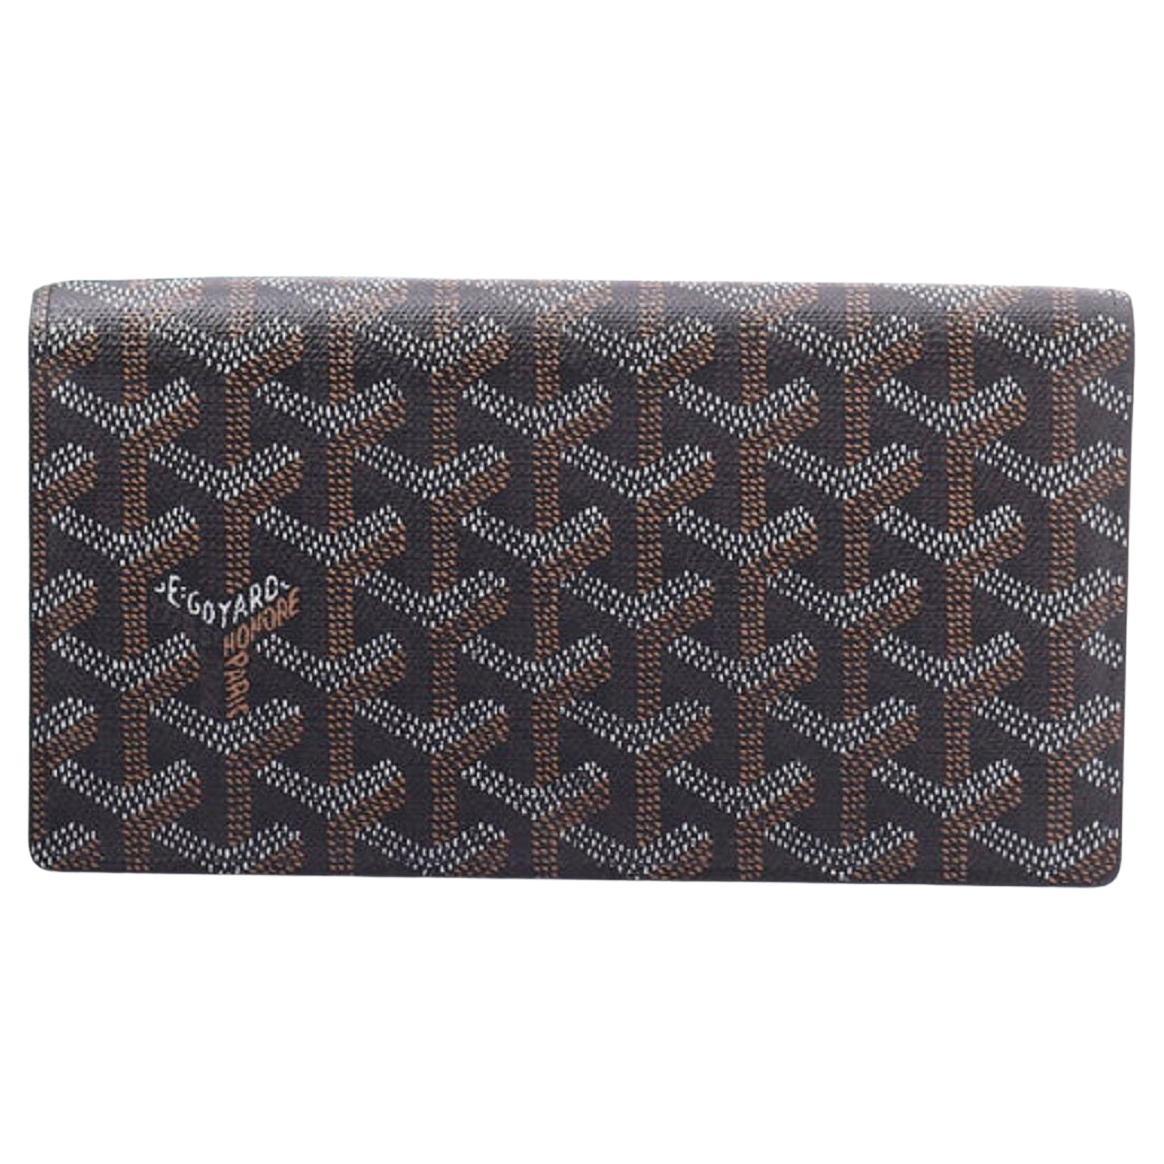 Goyard Richelieu long wallet is crafted of classic Goyardine Chevron coated For Sale